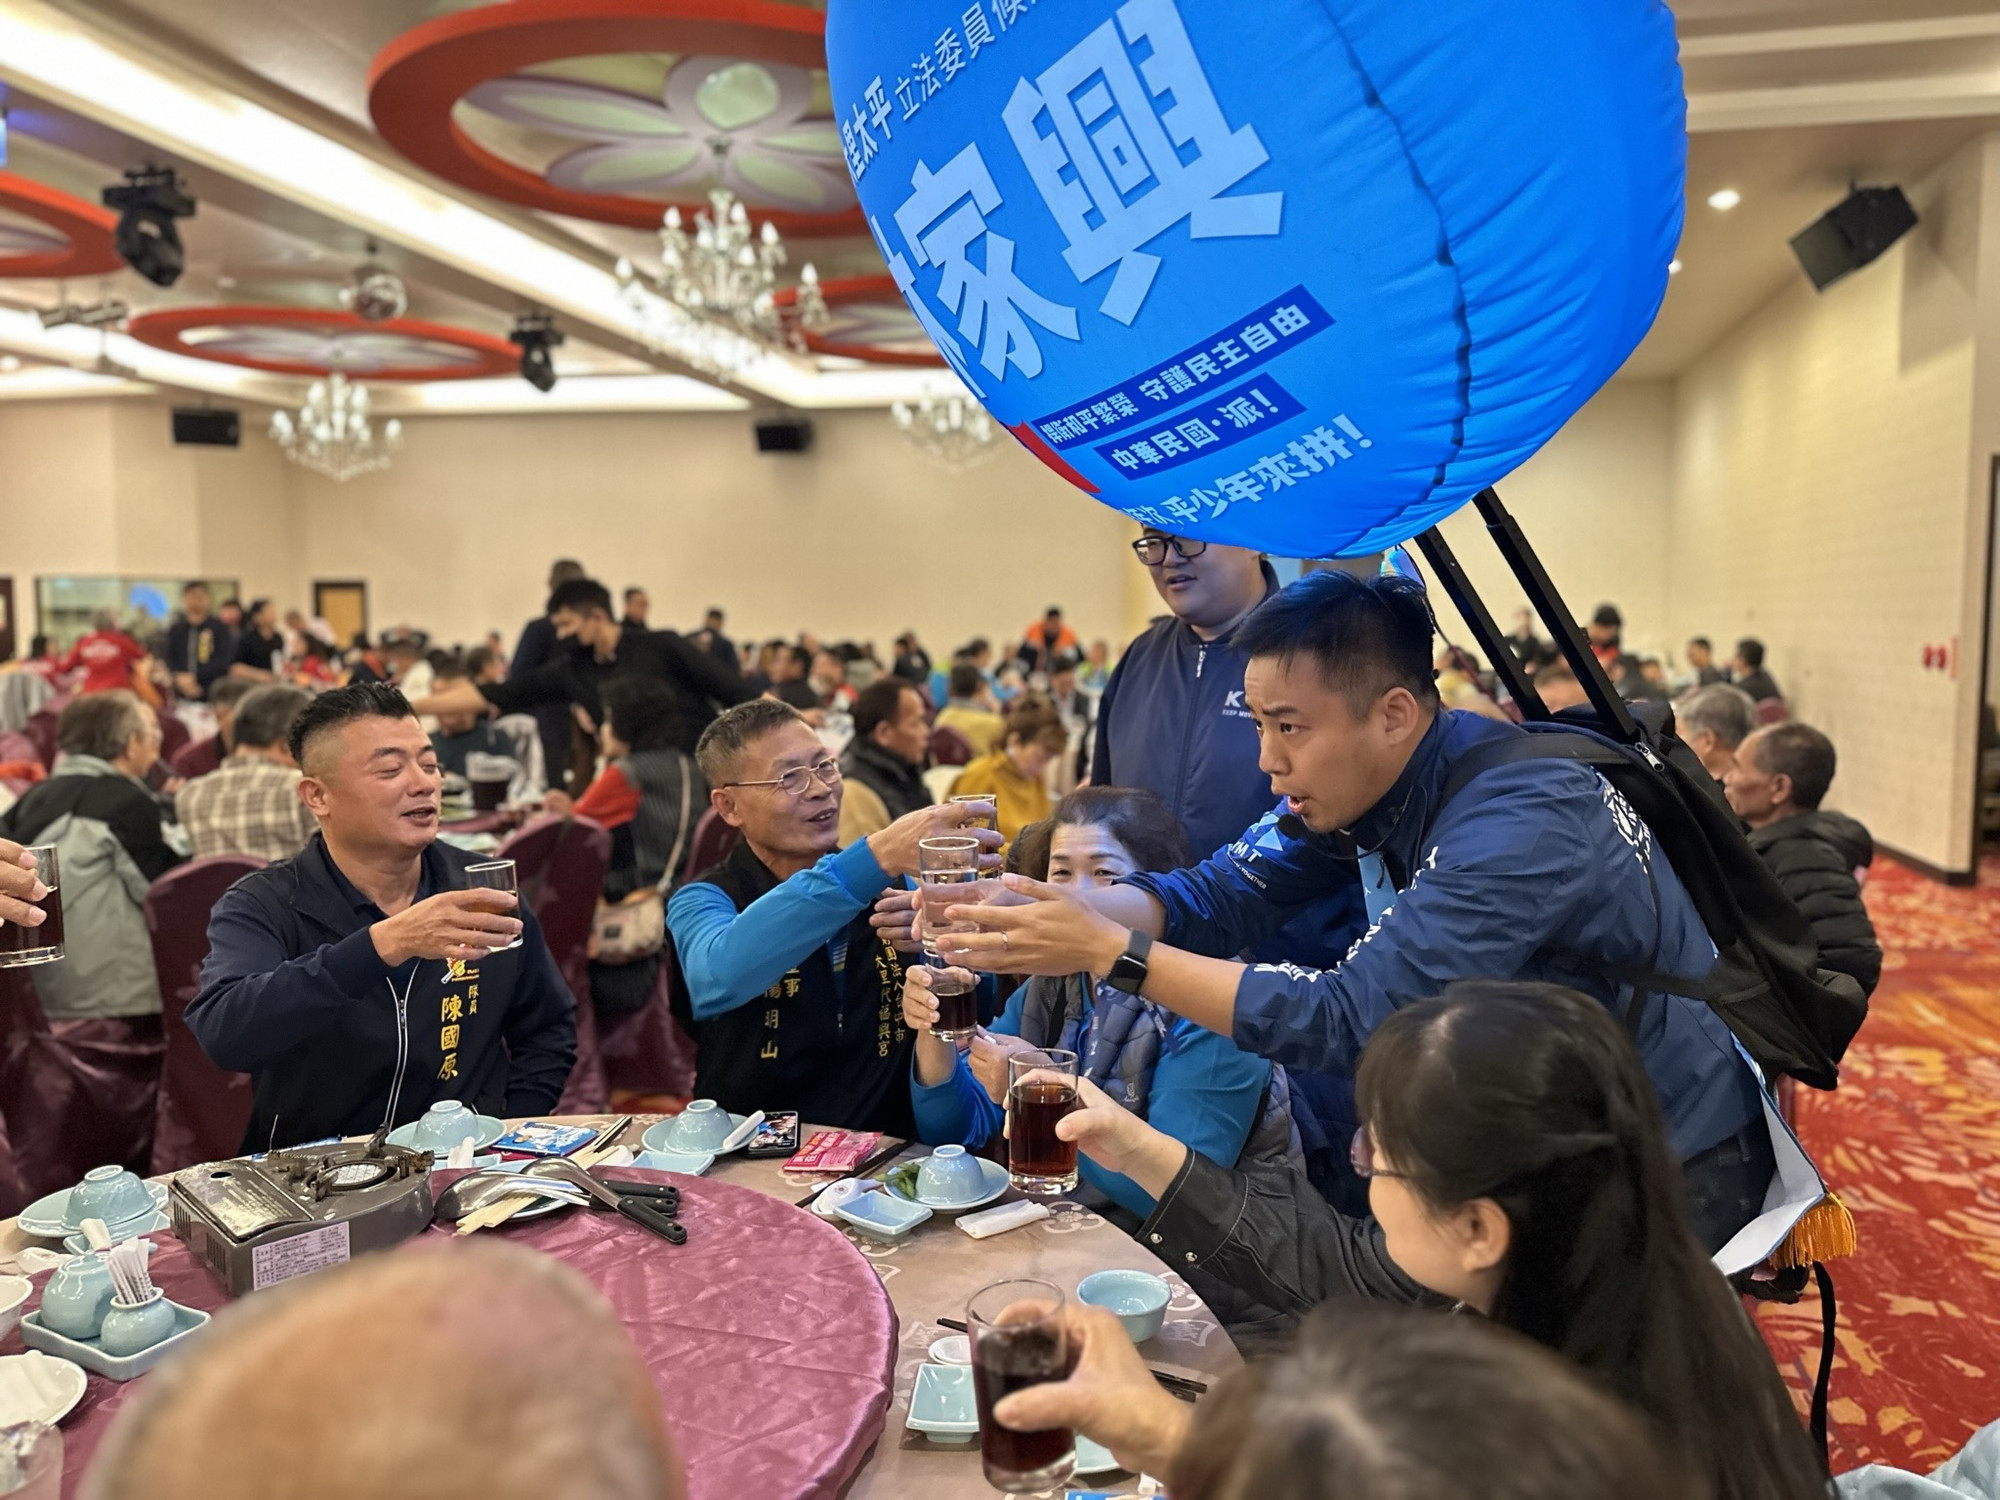 KMT legislative candidate Alfred Lin (right) is determined to build on the support base he developed among his local community during his unsuccessful bid in Taiwan’s January election. Photo: Kinling Lo